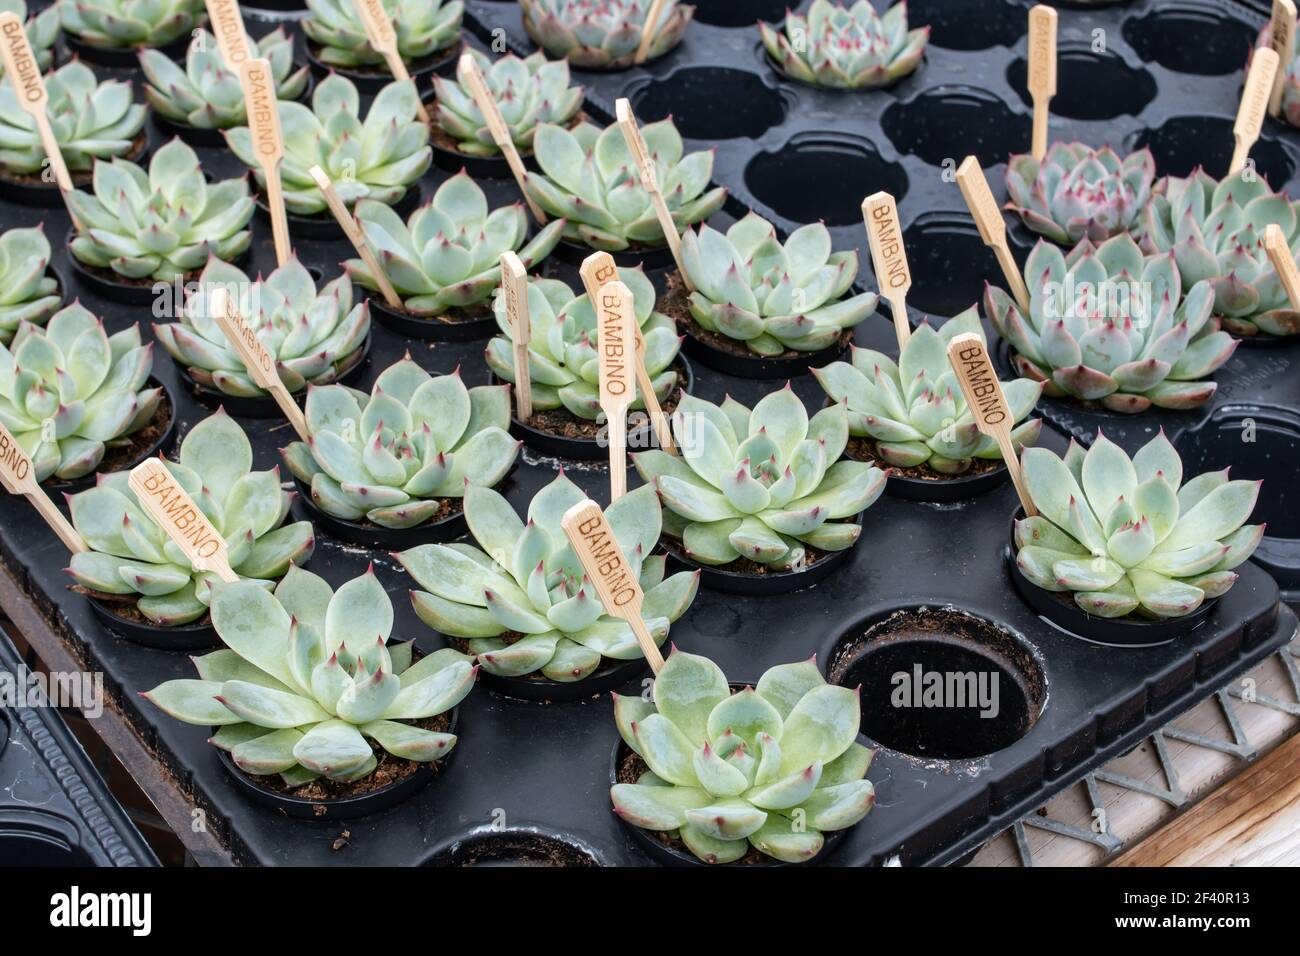 A black tray of bambino succulents with small wooden markers indicating the variety in a London Ontario Canada greenhouse, Spring 2021 Stock Photo